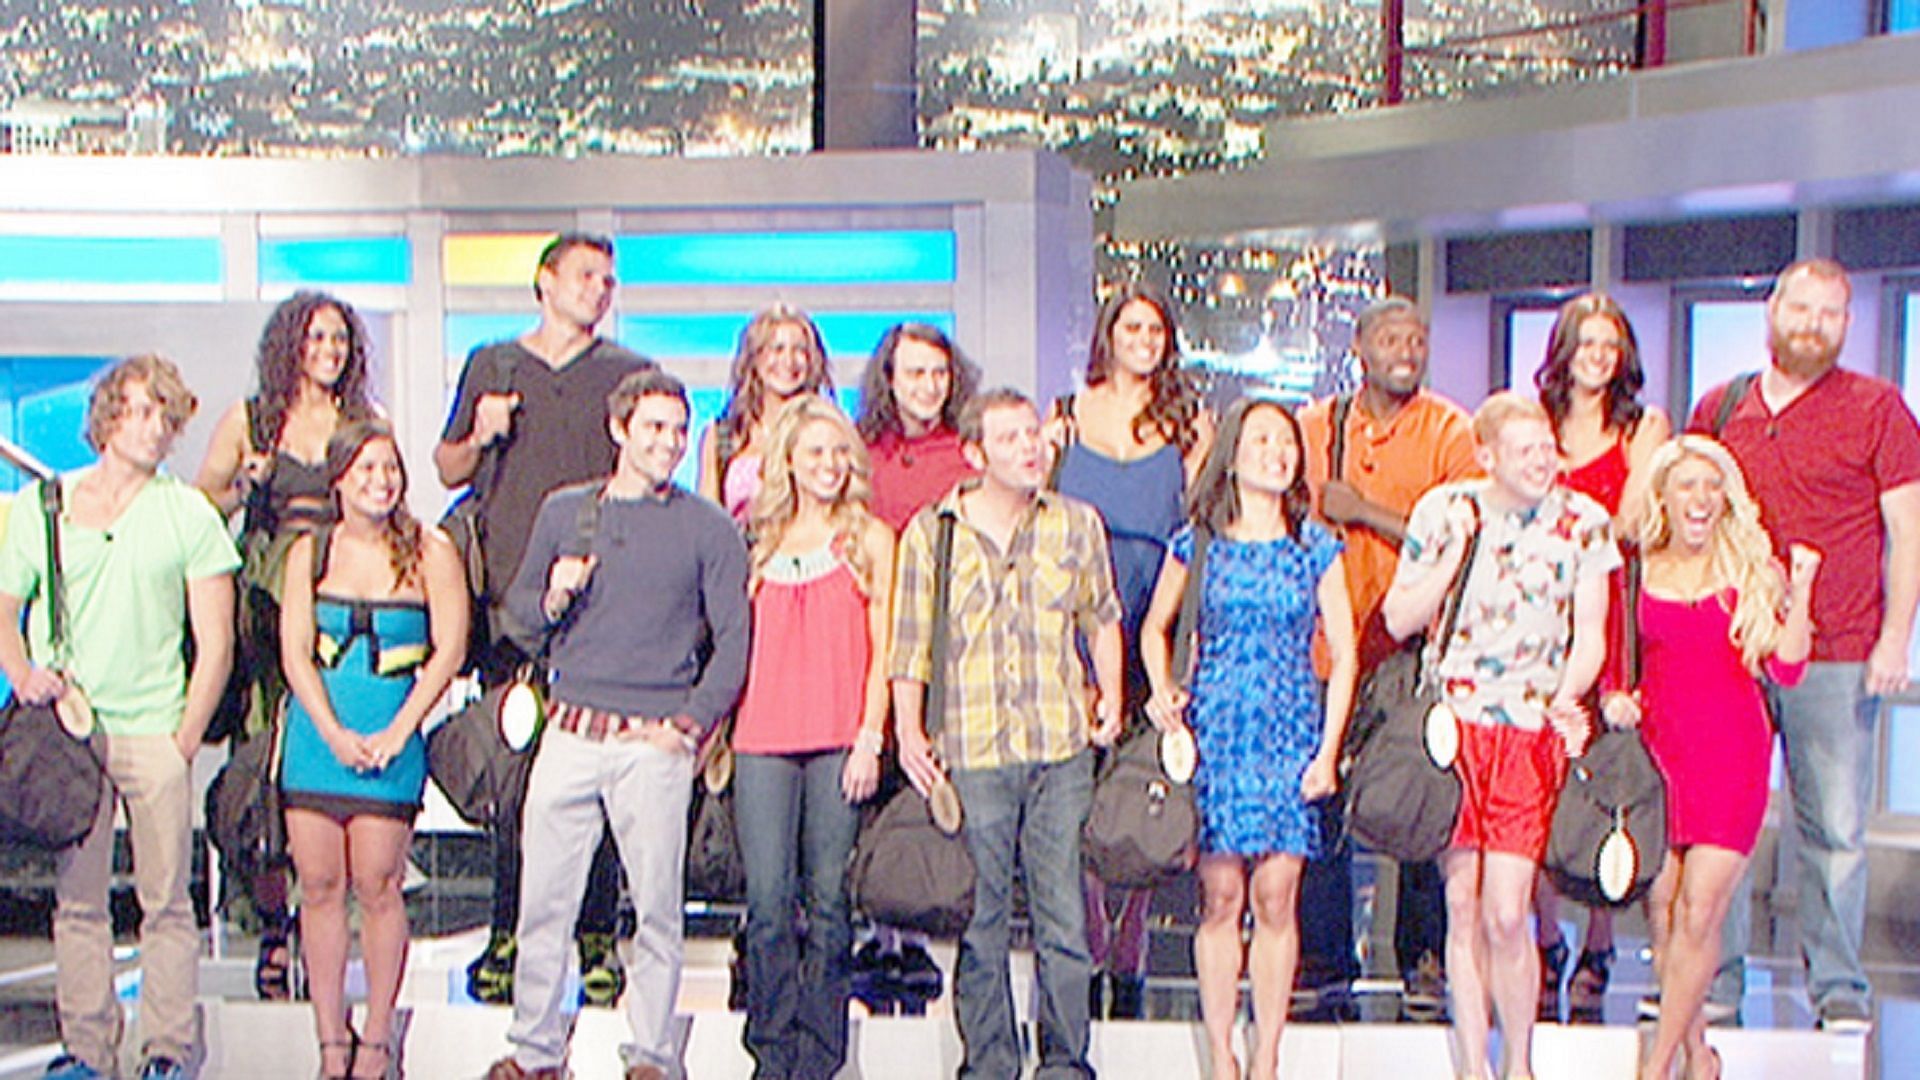 Multiple Big Brother 15 guests were accused of racism. (Image via Amazon)